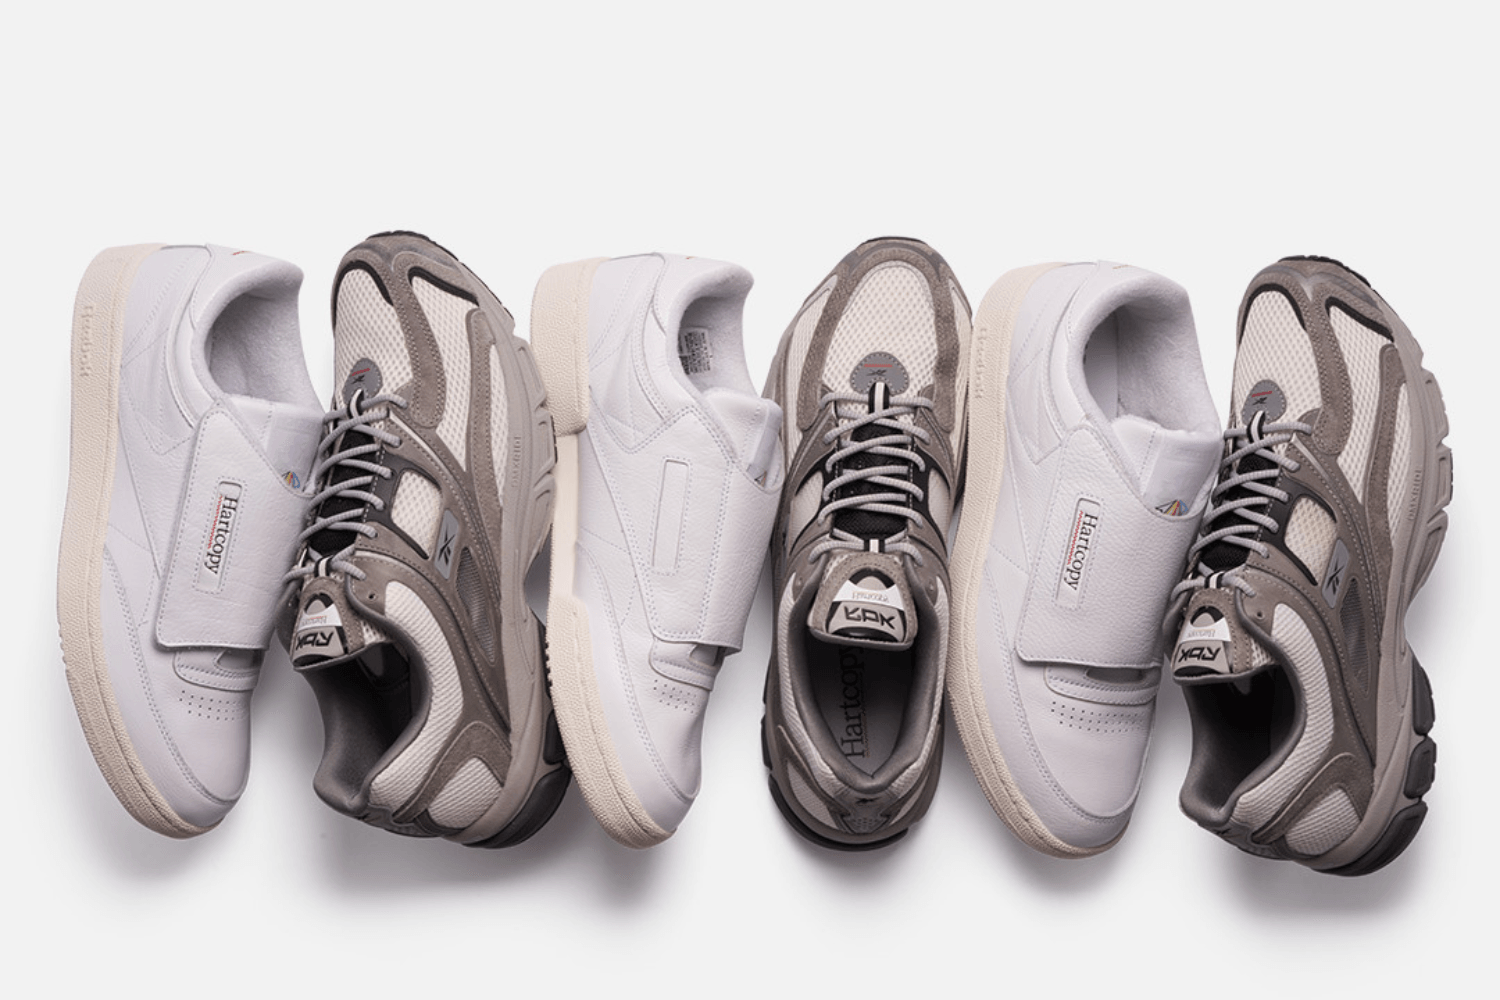 The Hartopy x Reebok Trinity Premier &amp; Club C Velcro are now available at Footpatrol